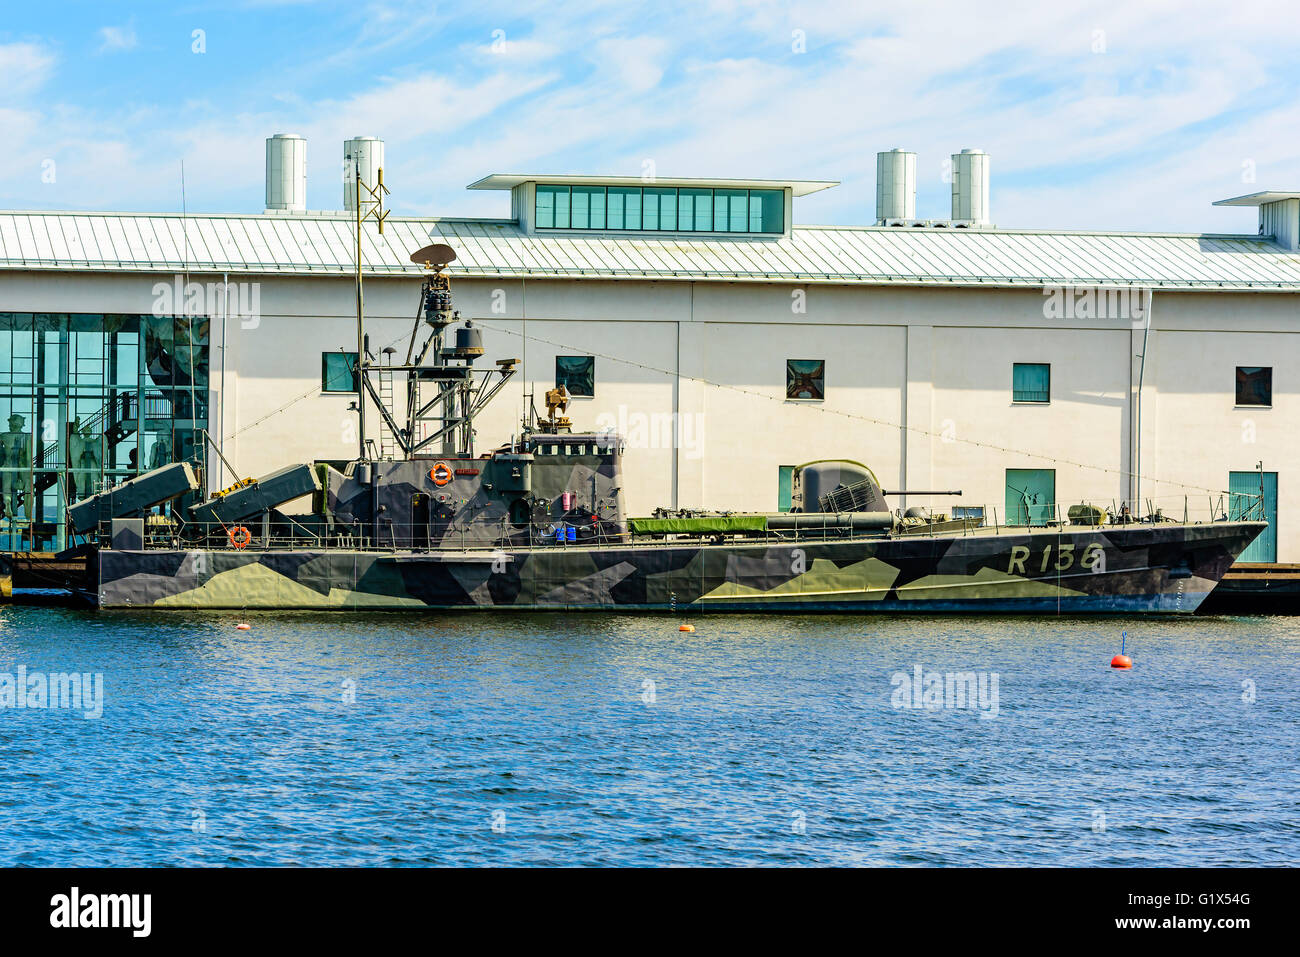 Karlskrona, Sweden - May 3, 2016: HMS Vastervik is an old (1974-1997) Swedish military torpedo boat and later missile boat, now Stock Photo